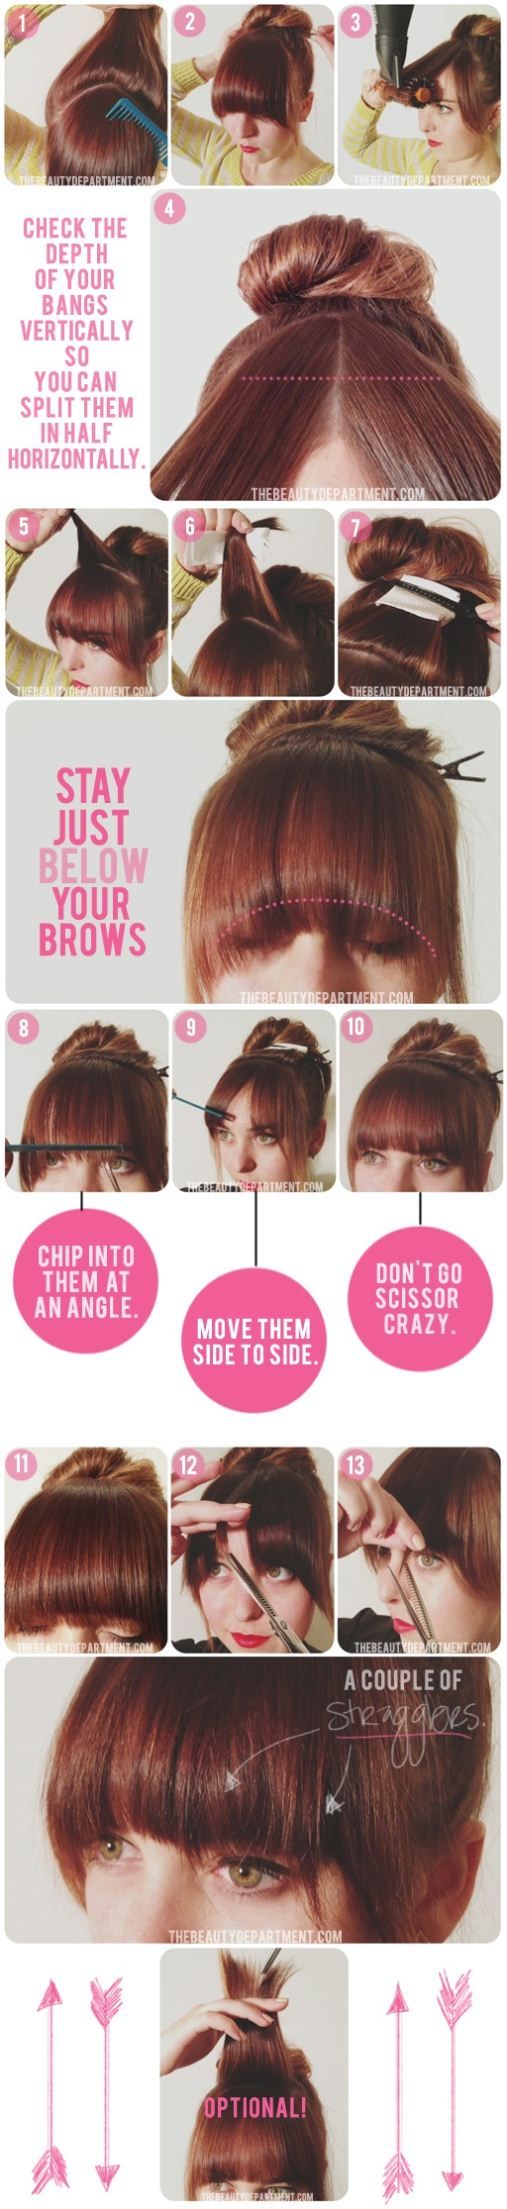 How-to-cut-your-bangs about